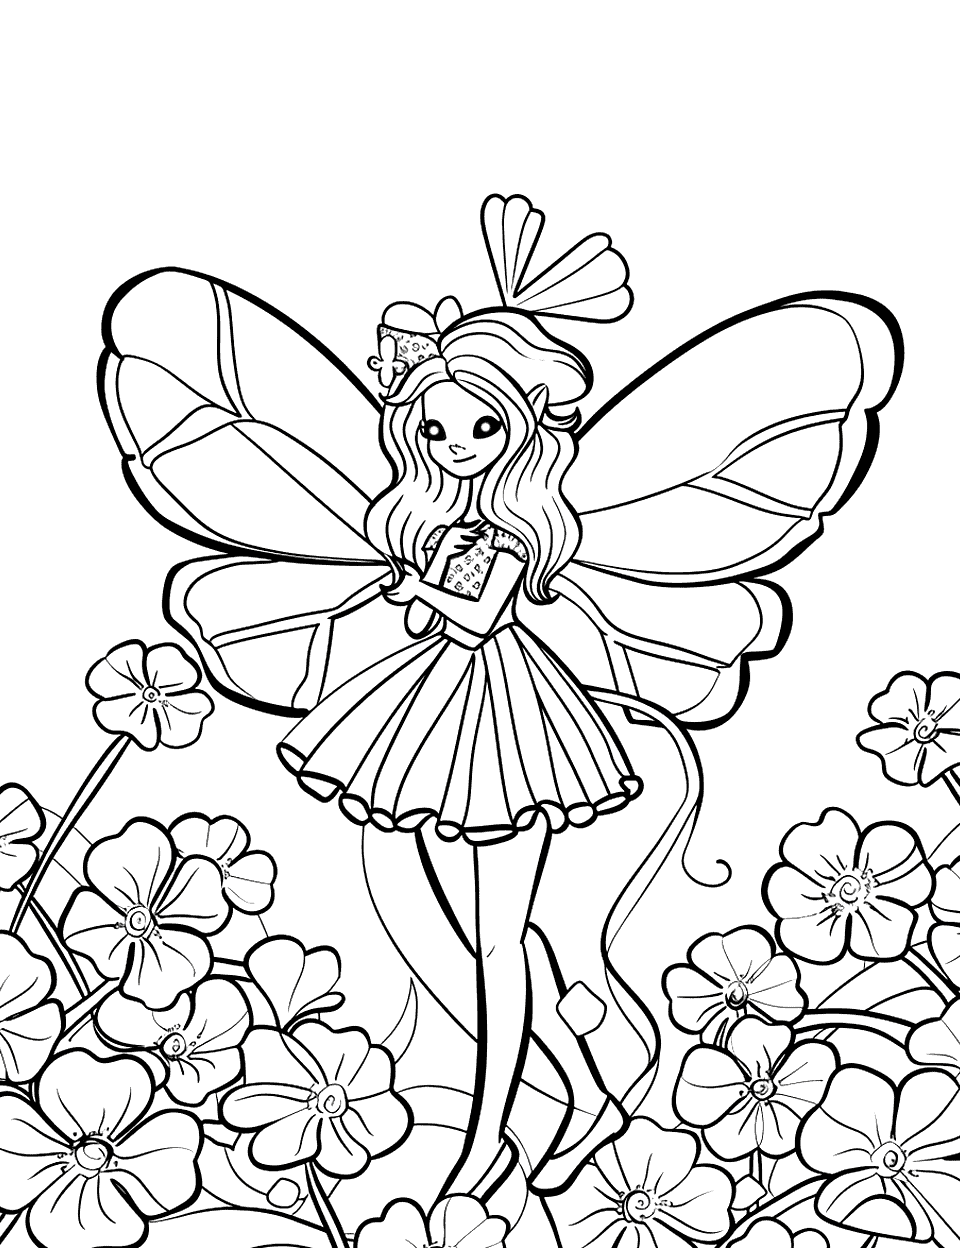 Shamrock Fairy in a Magical Garden Coloring Page - A small fairy with wings flitting around a garden filled with clovers.